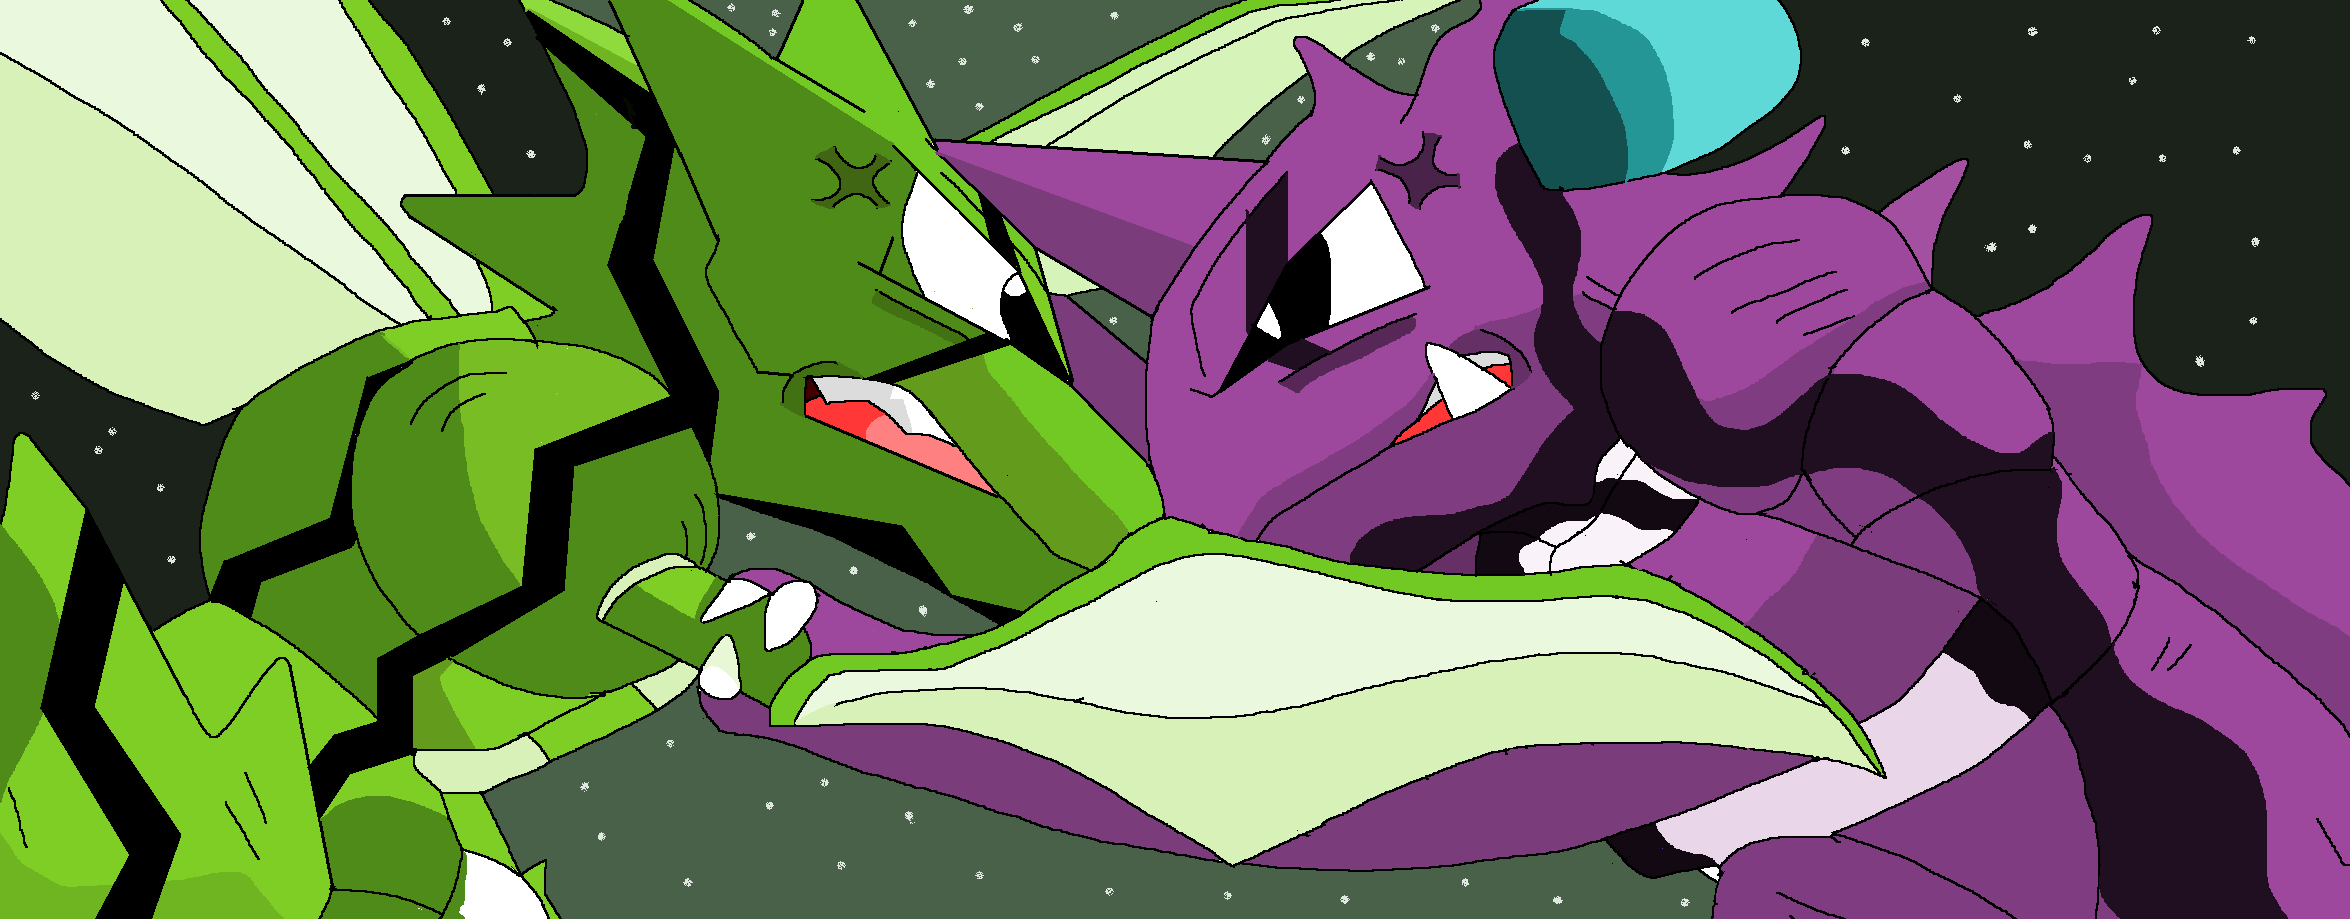 Nidoking Vs Scyther Image It S A Life Or Death Matter